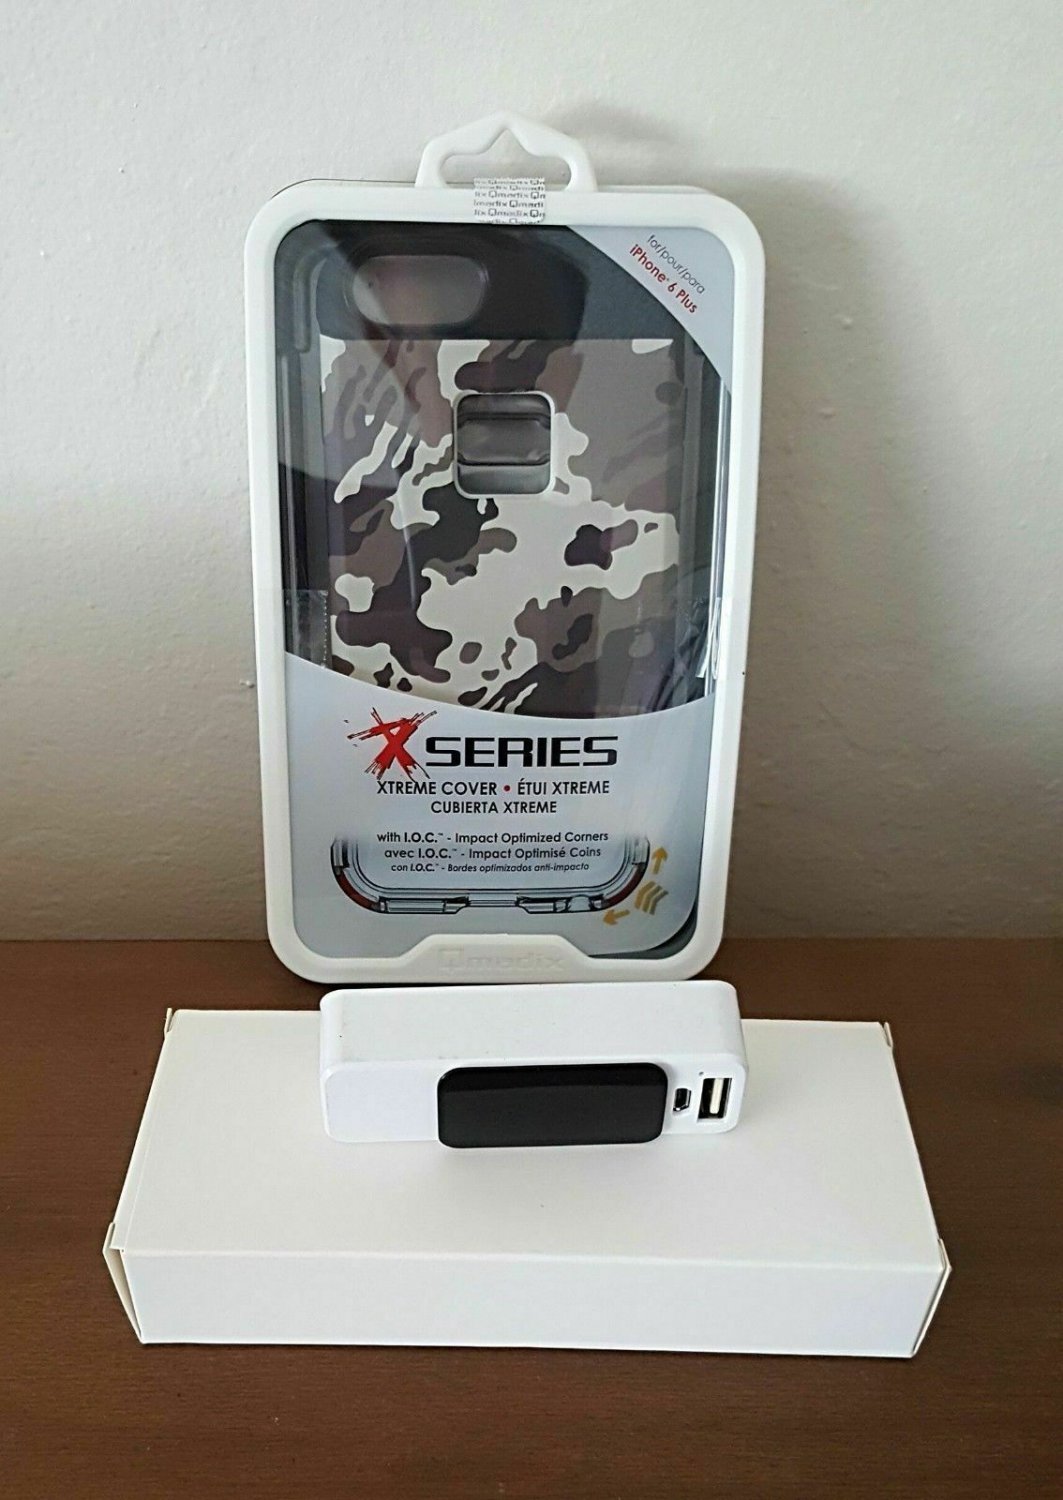 X-Series Extreme Cover for iPhone 6 Plus (Light Cameo)  Free 2200MAH Powerbank